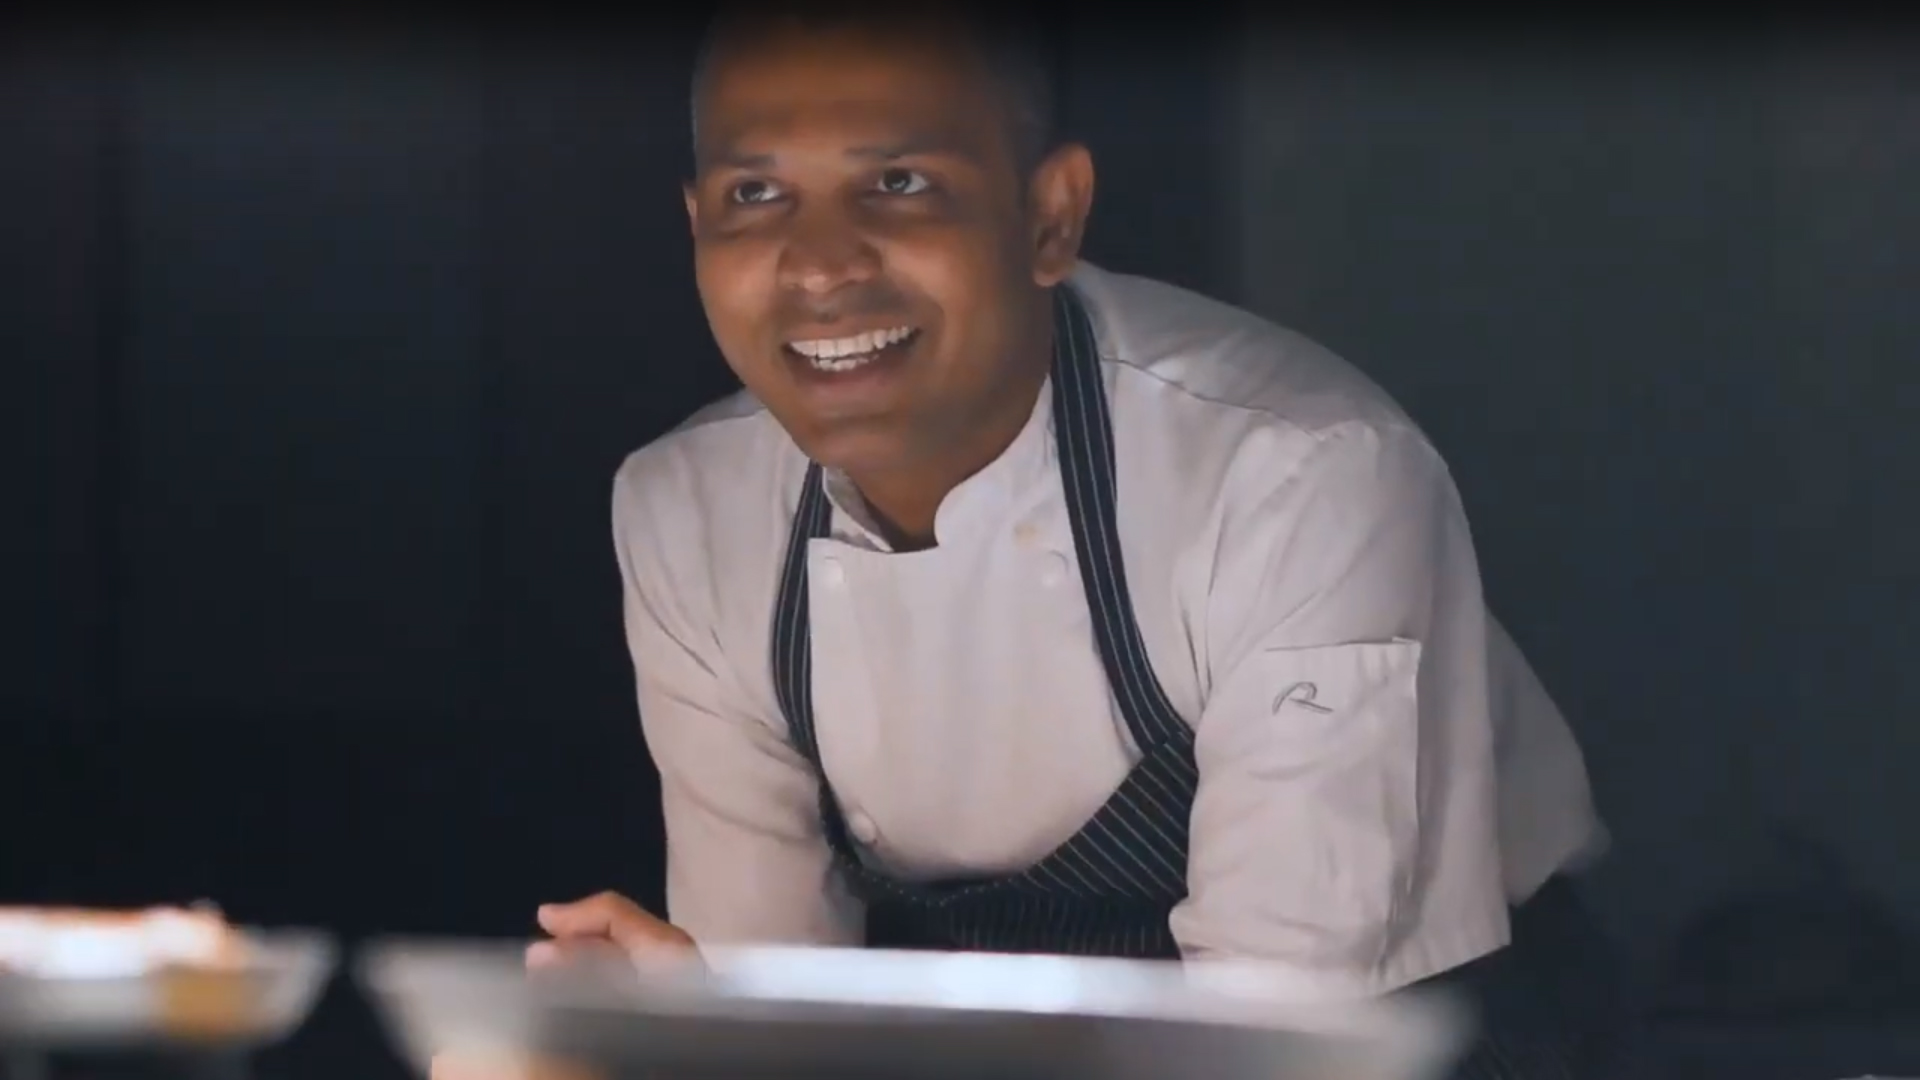 A picture of a chef smiling.